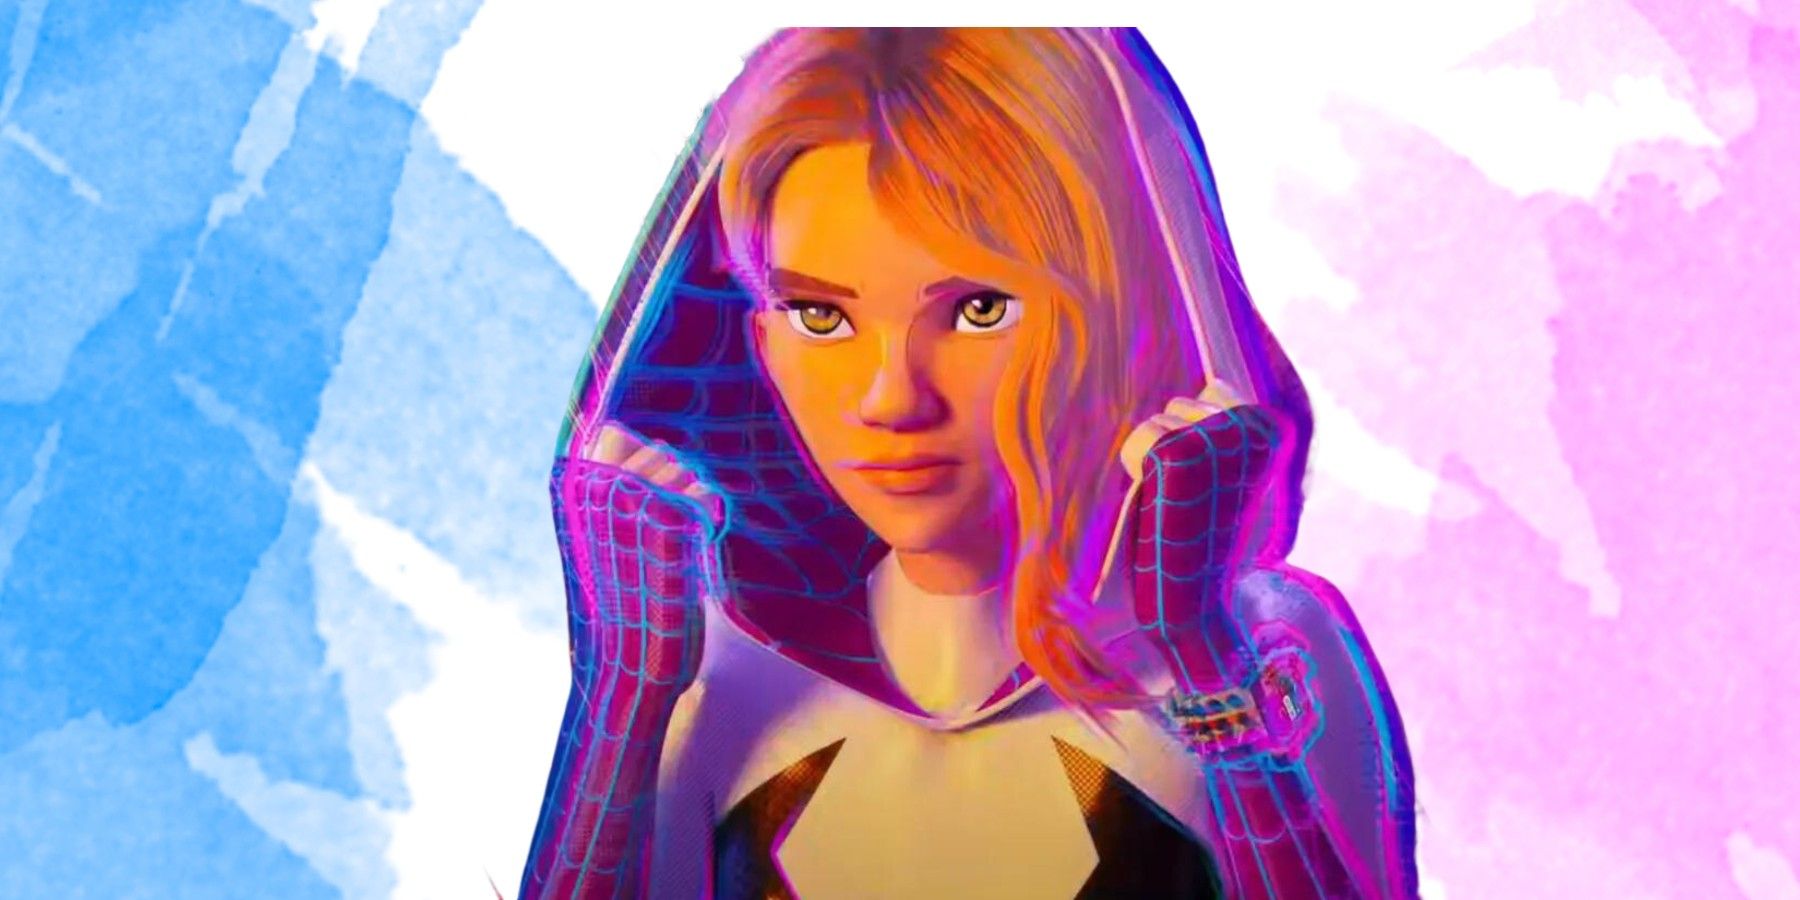 gwen stacy is trans, online theory